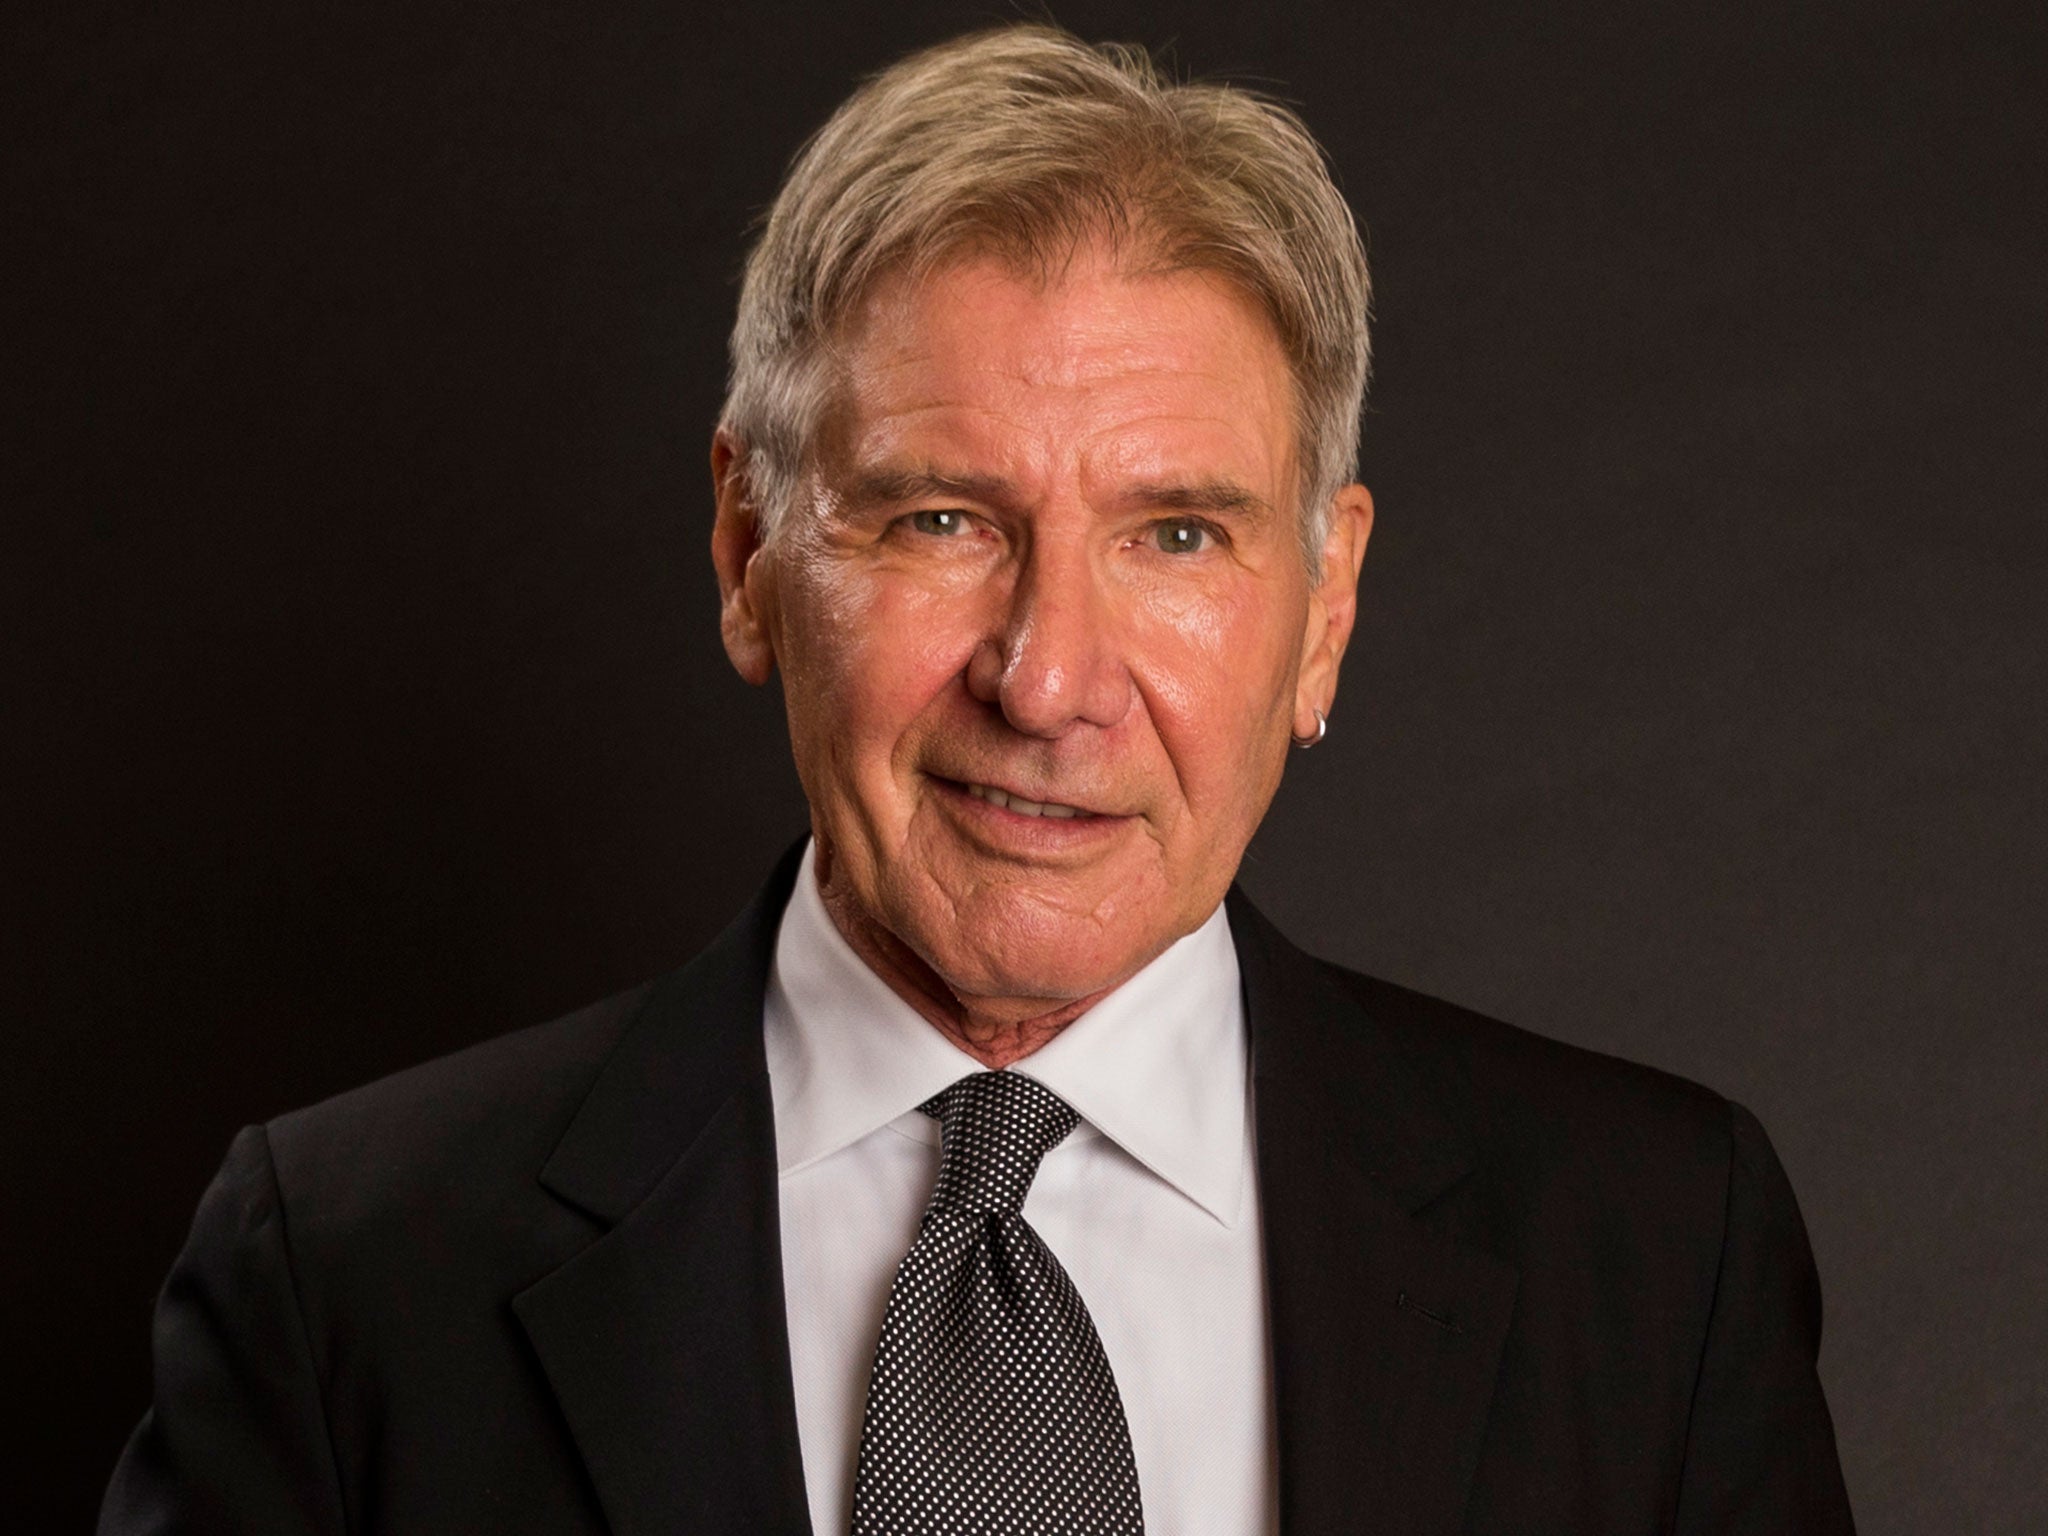 Harrison Ford suffered a suspected broken ankle in the accident